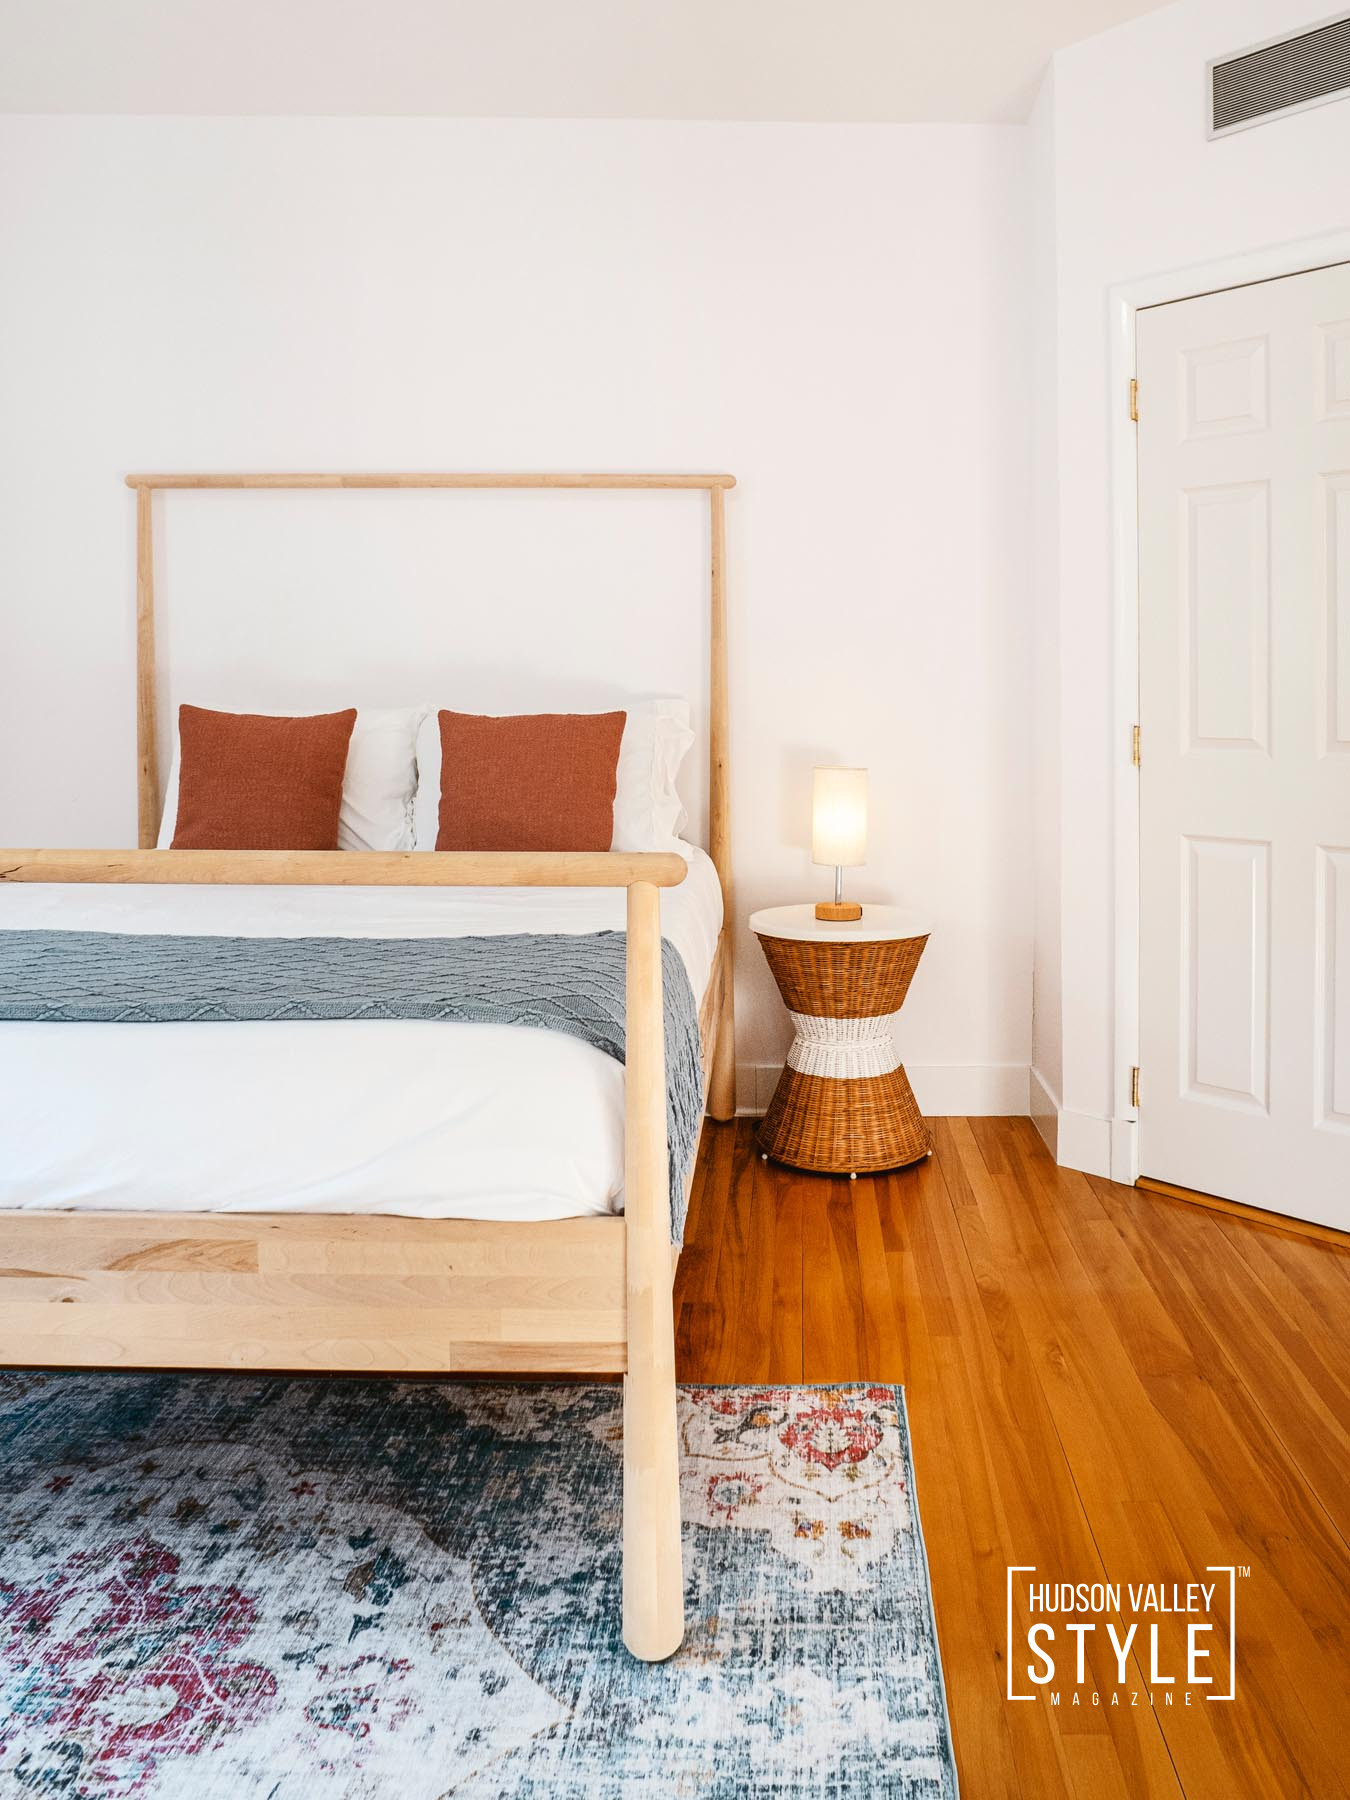 Discover Hudson Valley with Morning Wood – Sunny Catskills Airbnb Cottage near Hudson, NY – Photography by Maxwell Alexander / ALLUVION MEDIA